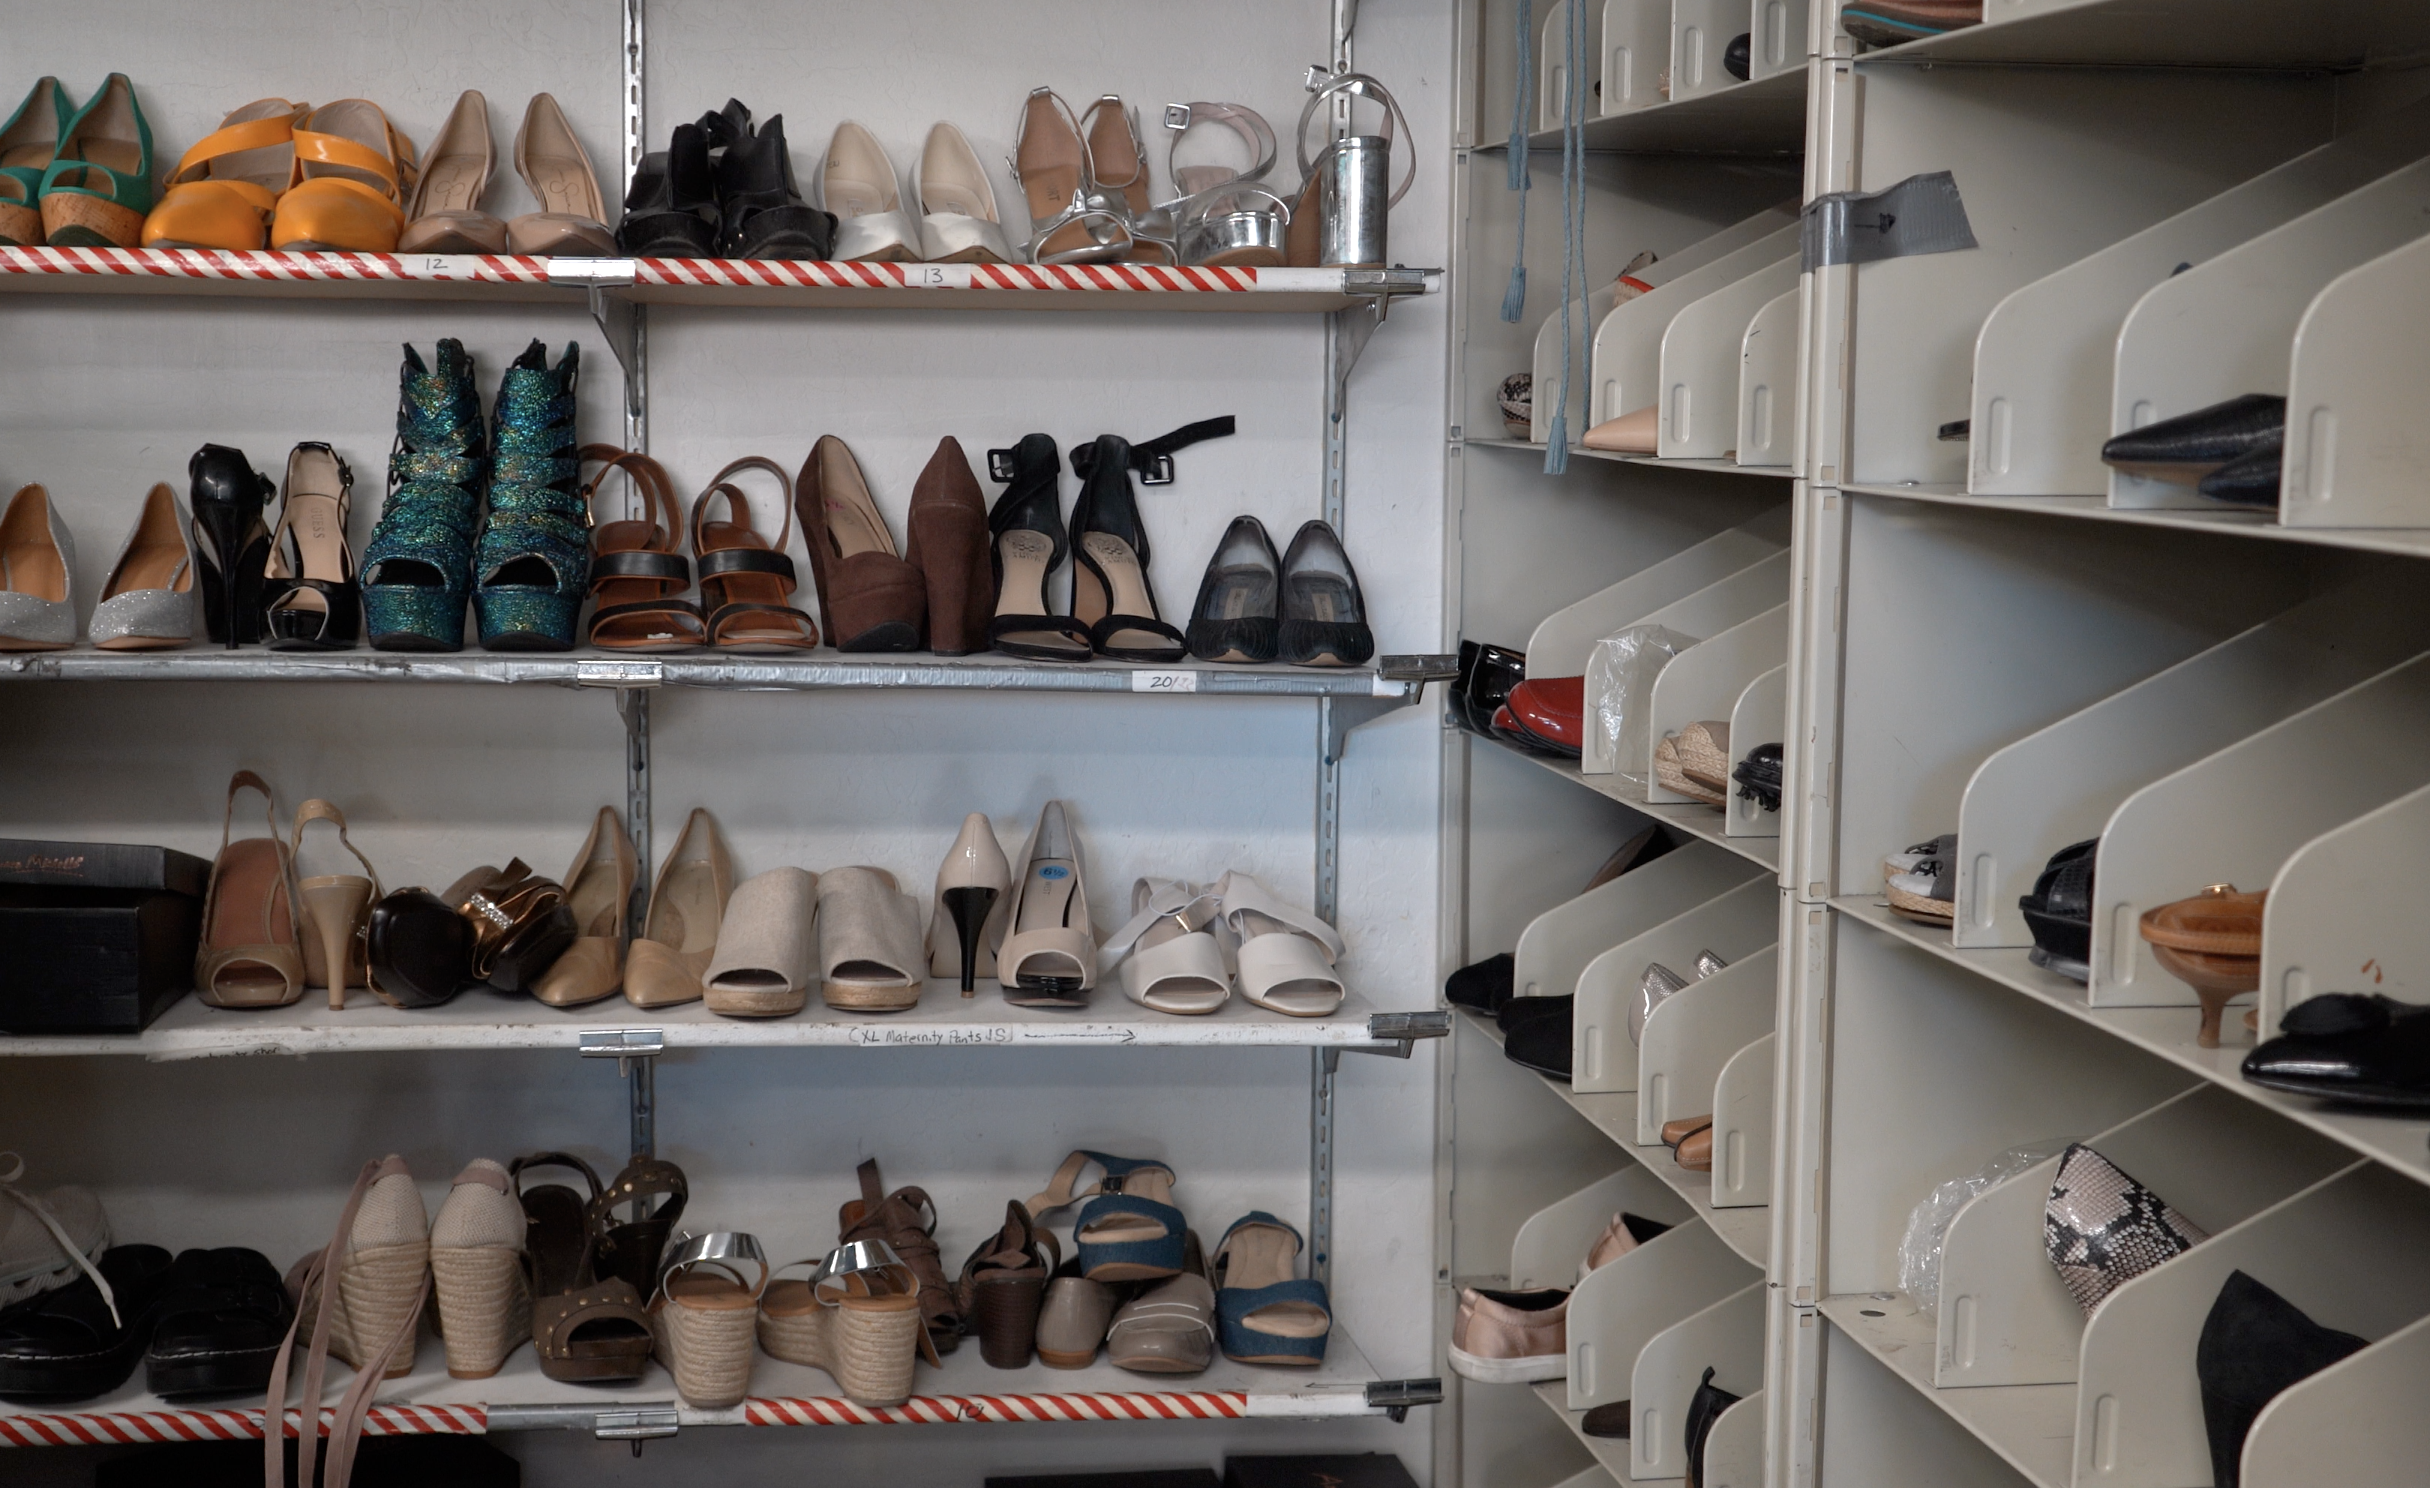 Image of donated professional shoe wear from UMOM's clothing closet.